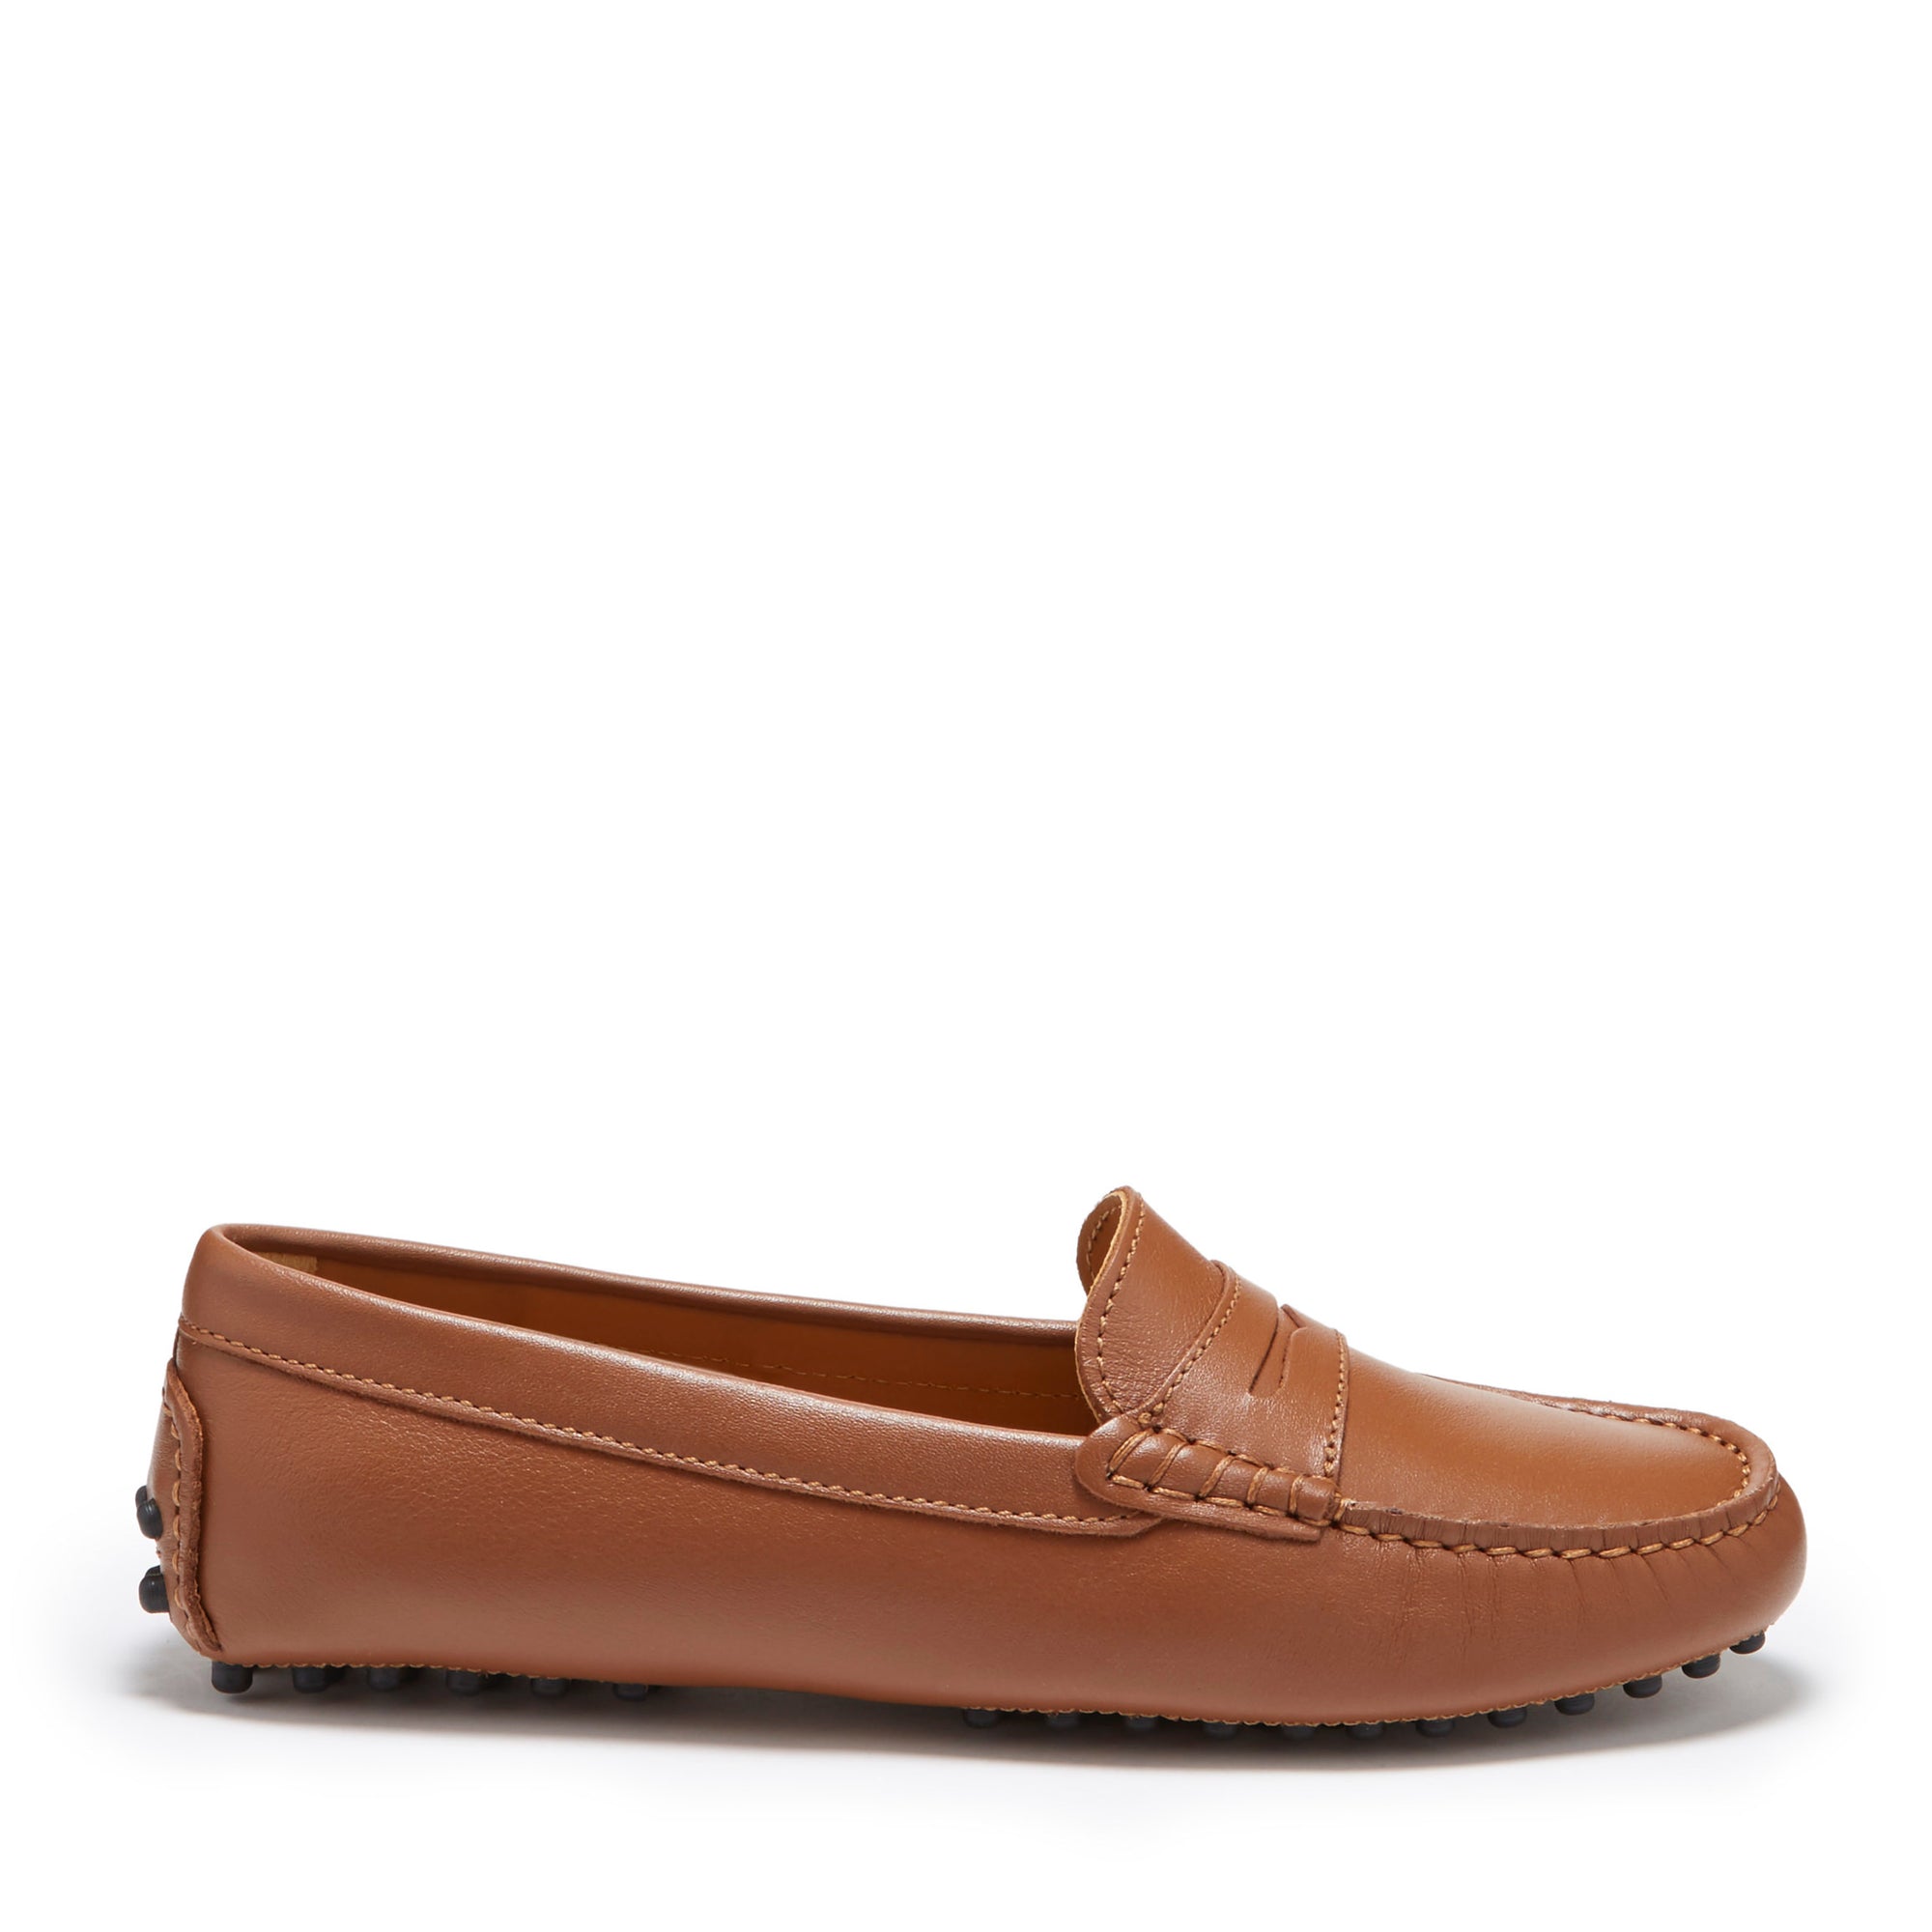 tan loafer shoes womens